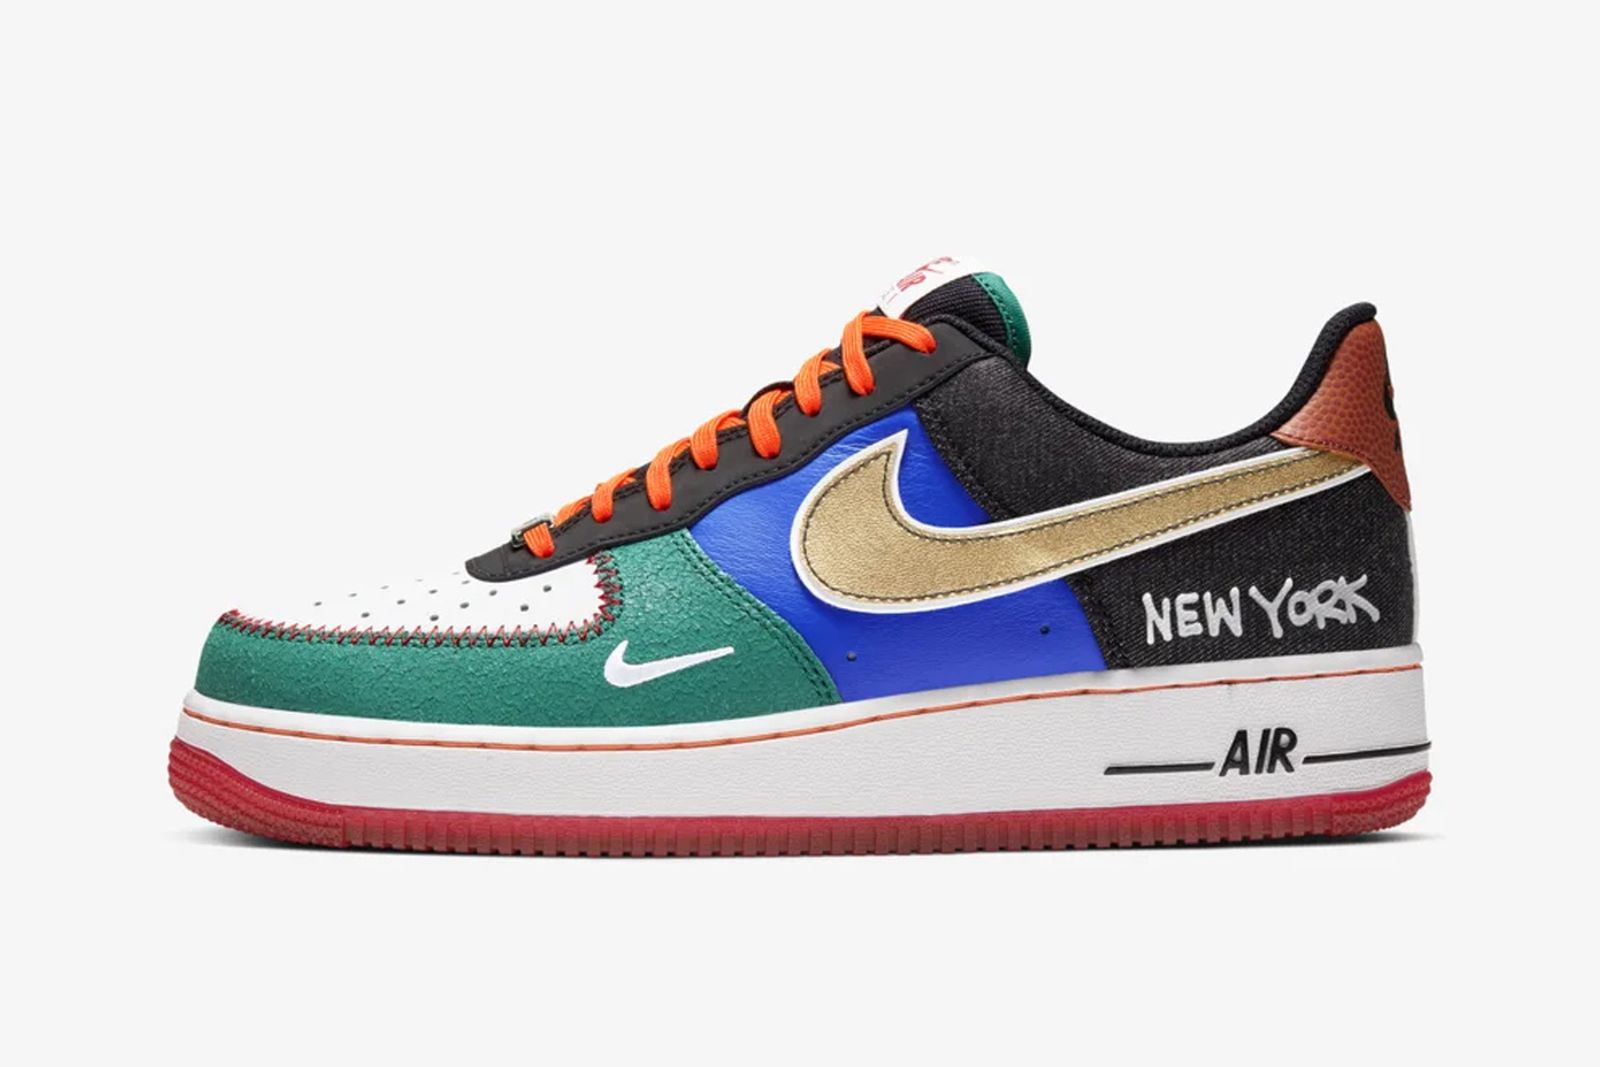 nike air force 1 nyc release date price